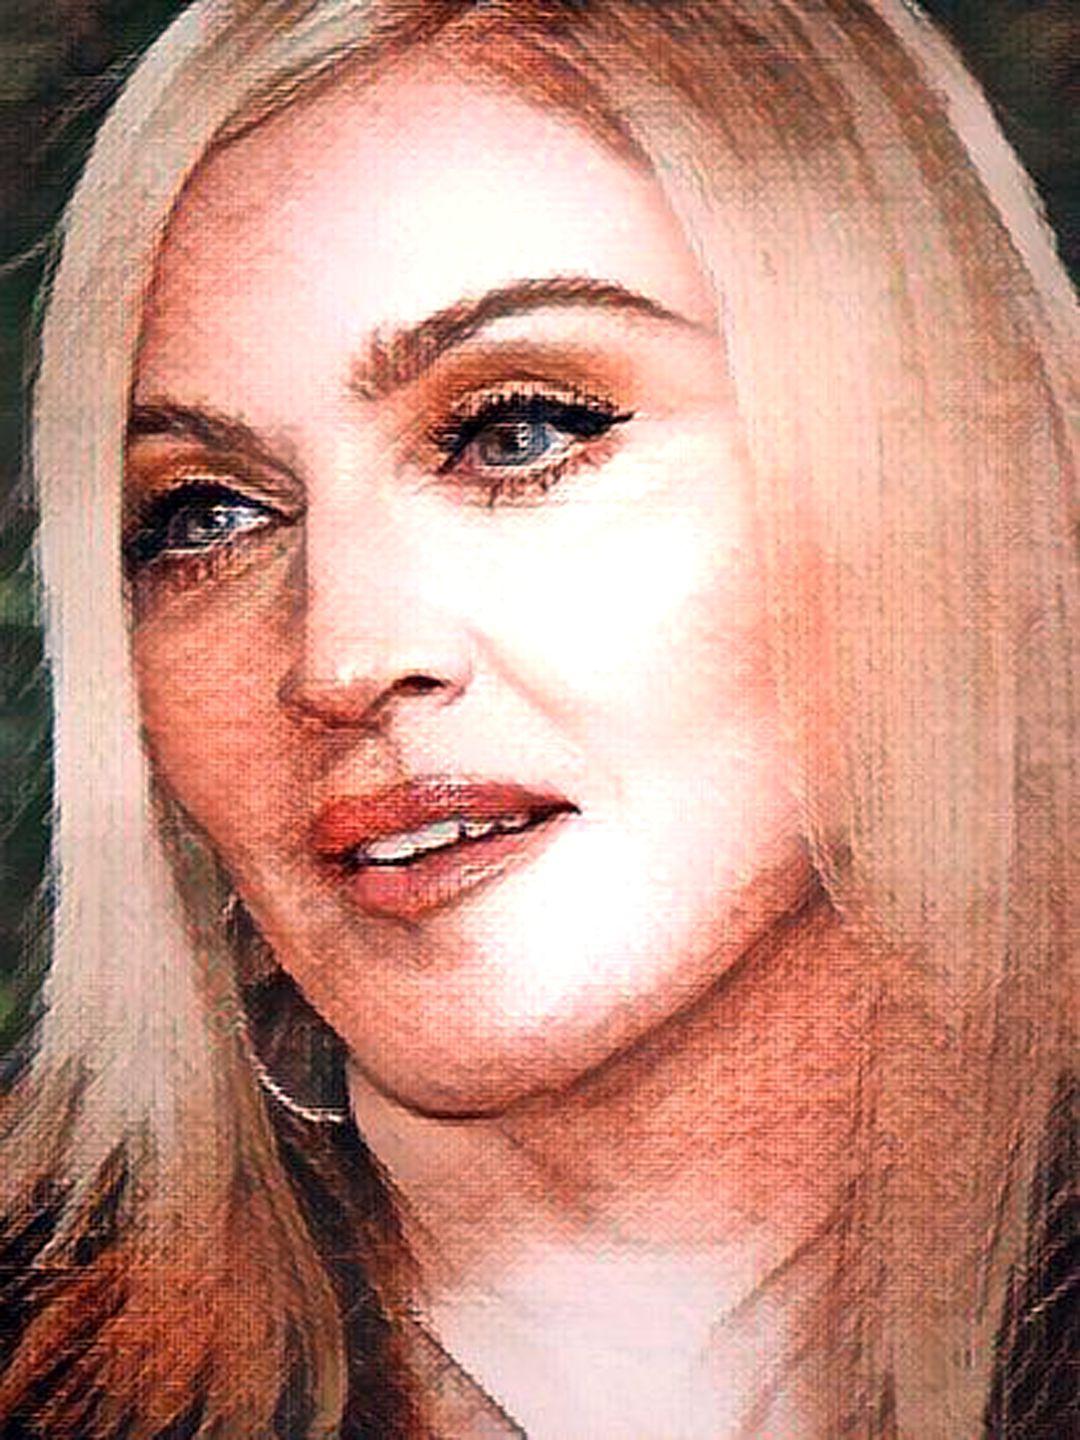 Madelyn Marie Schoolgirl - Madonna # 36 - Celeb ART - Beautiful Artworks of Celebrities, Footballers,  Politicians and Famous People in World | OpenSea